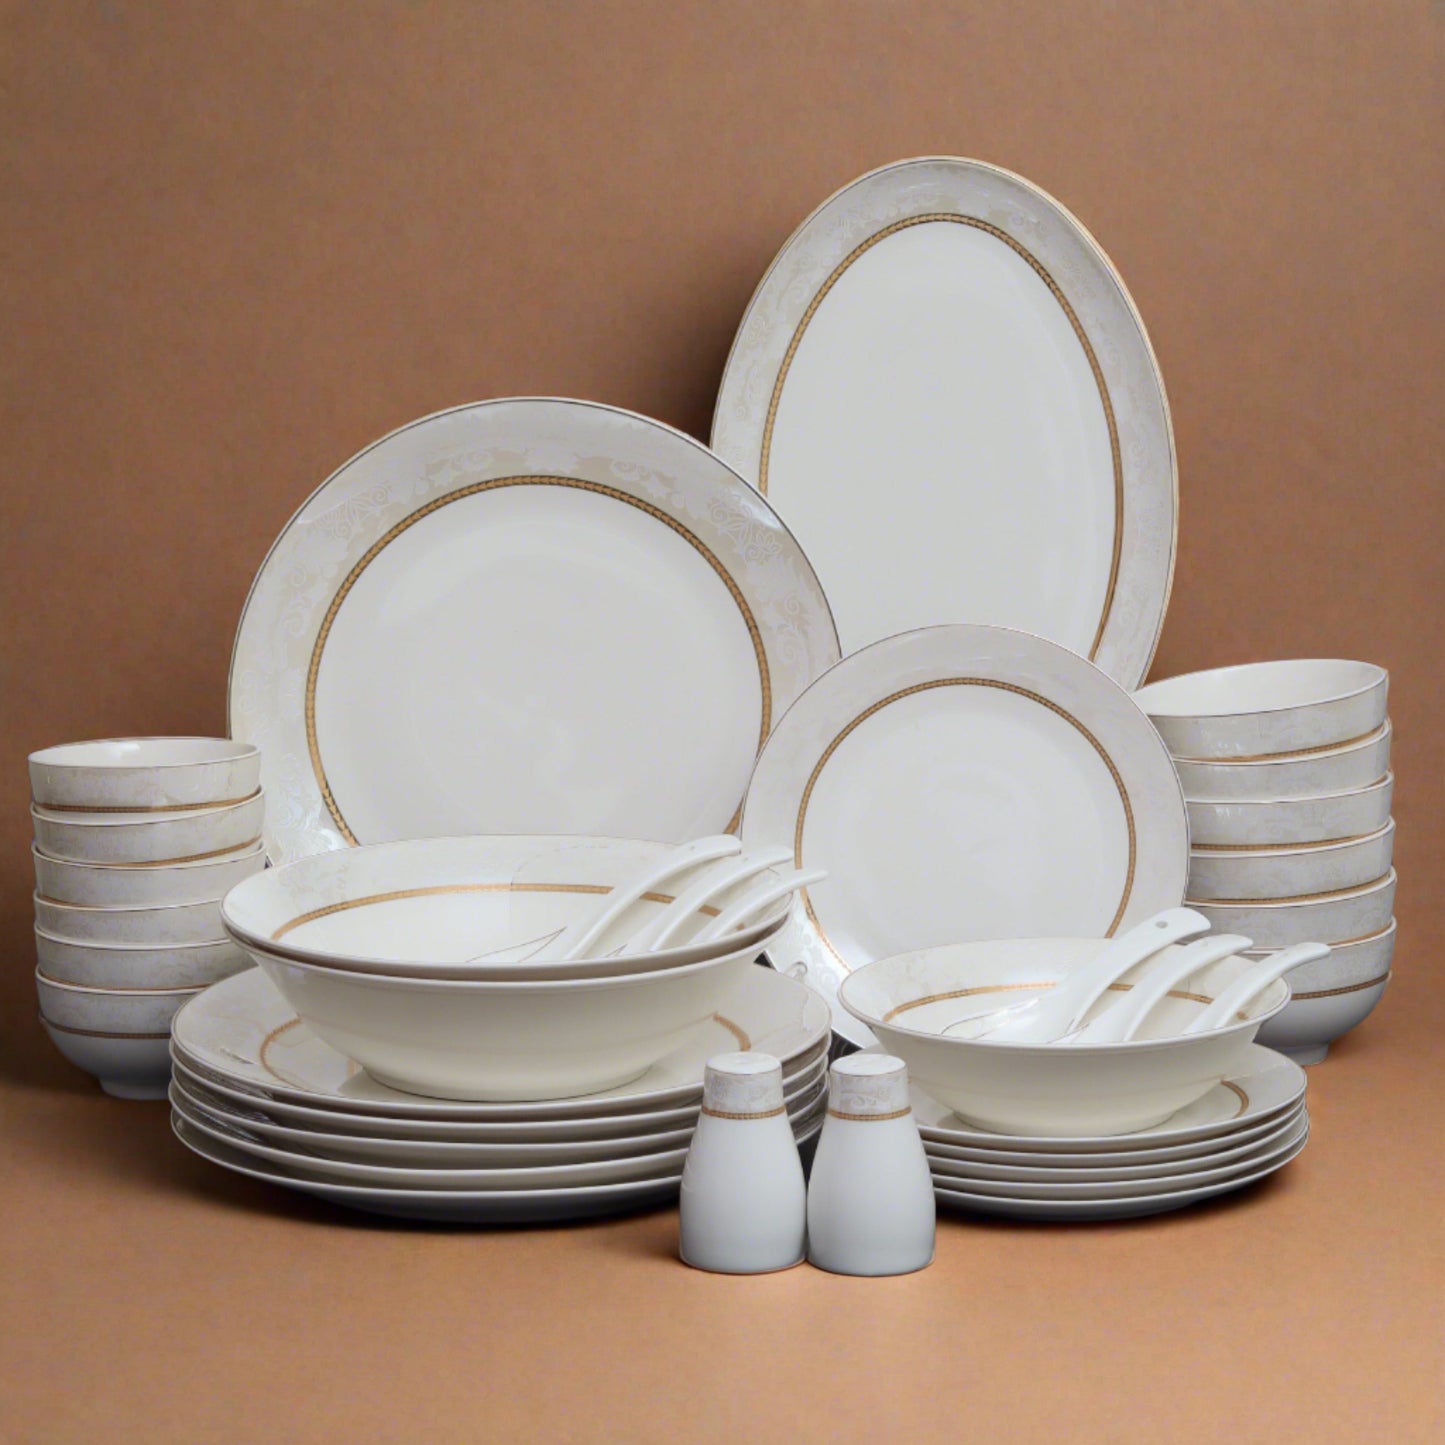 Elegant 36-piece fine bone china dinner set with floral motifs - perfect for luxurious dining experiences.